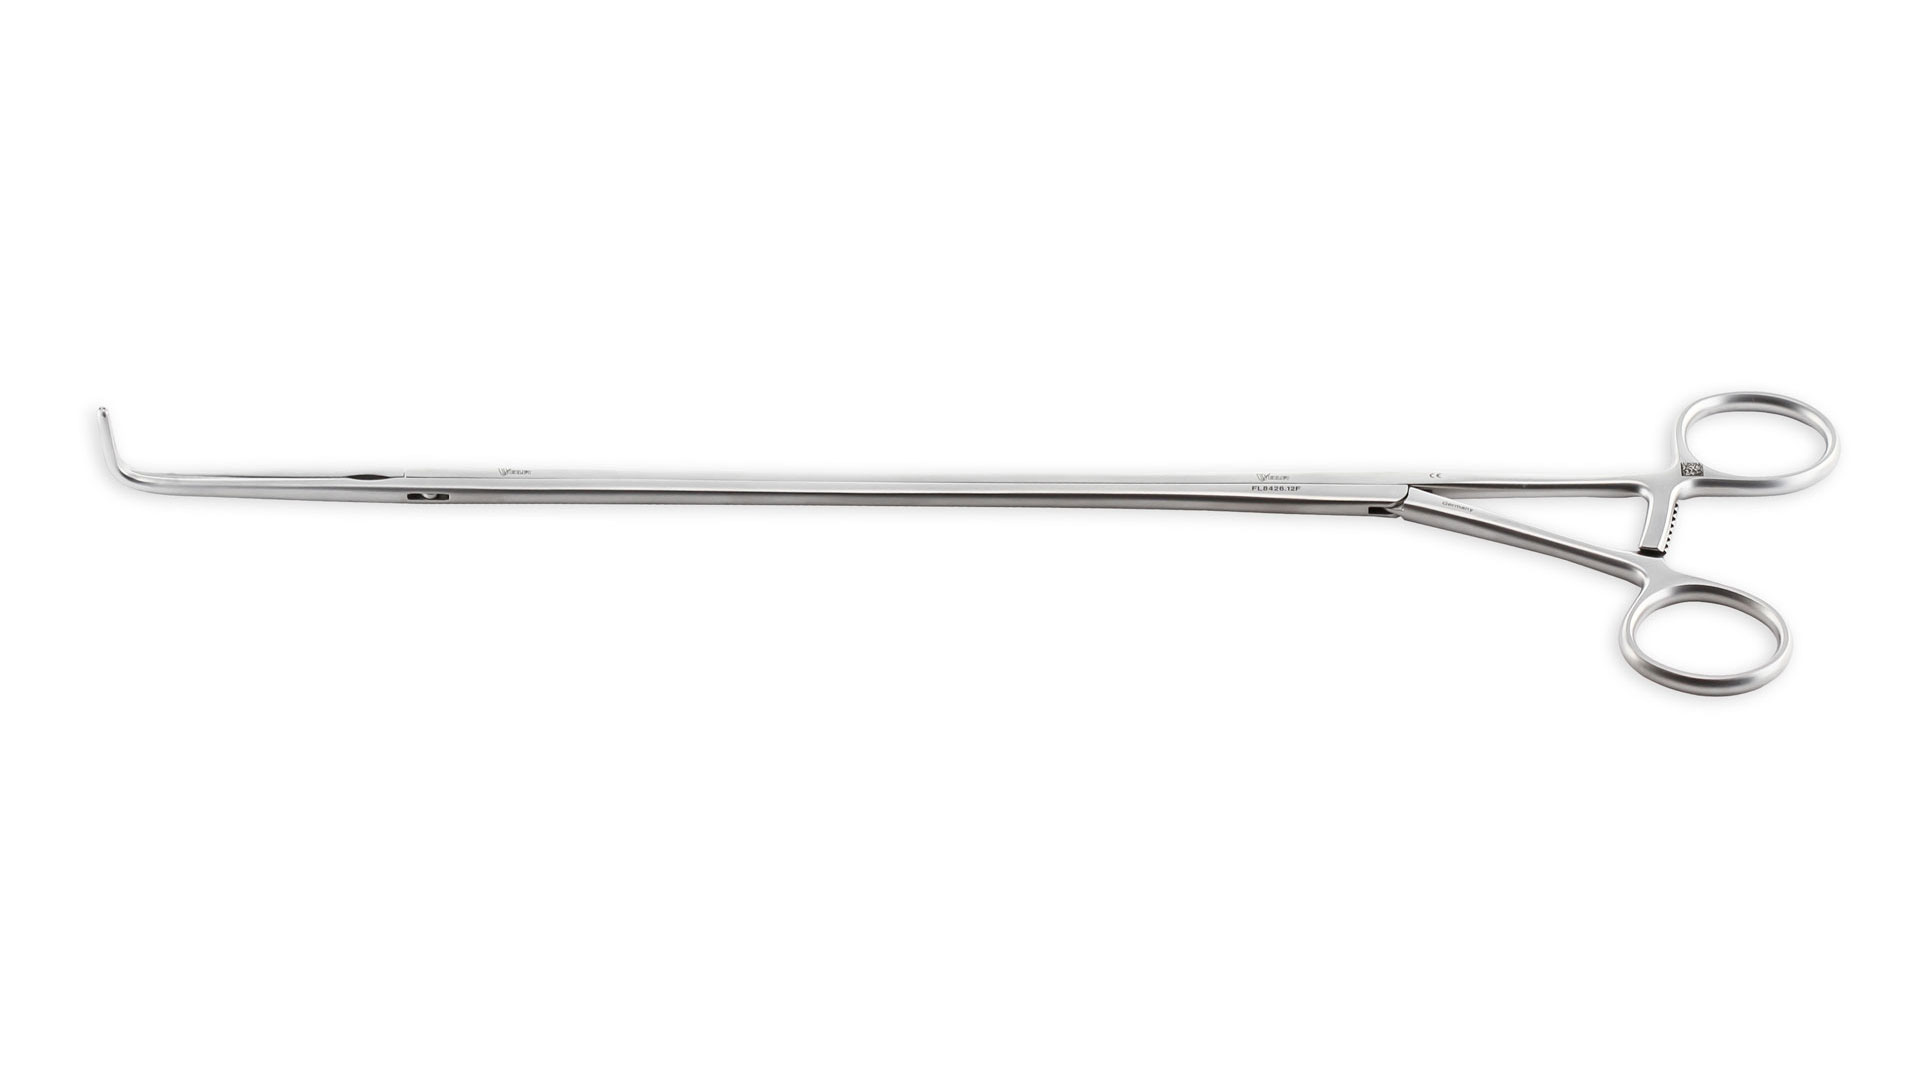 VATS Right Angle Fine Dissector – DeBakey/Cooley Fine serrated jaws